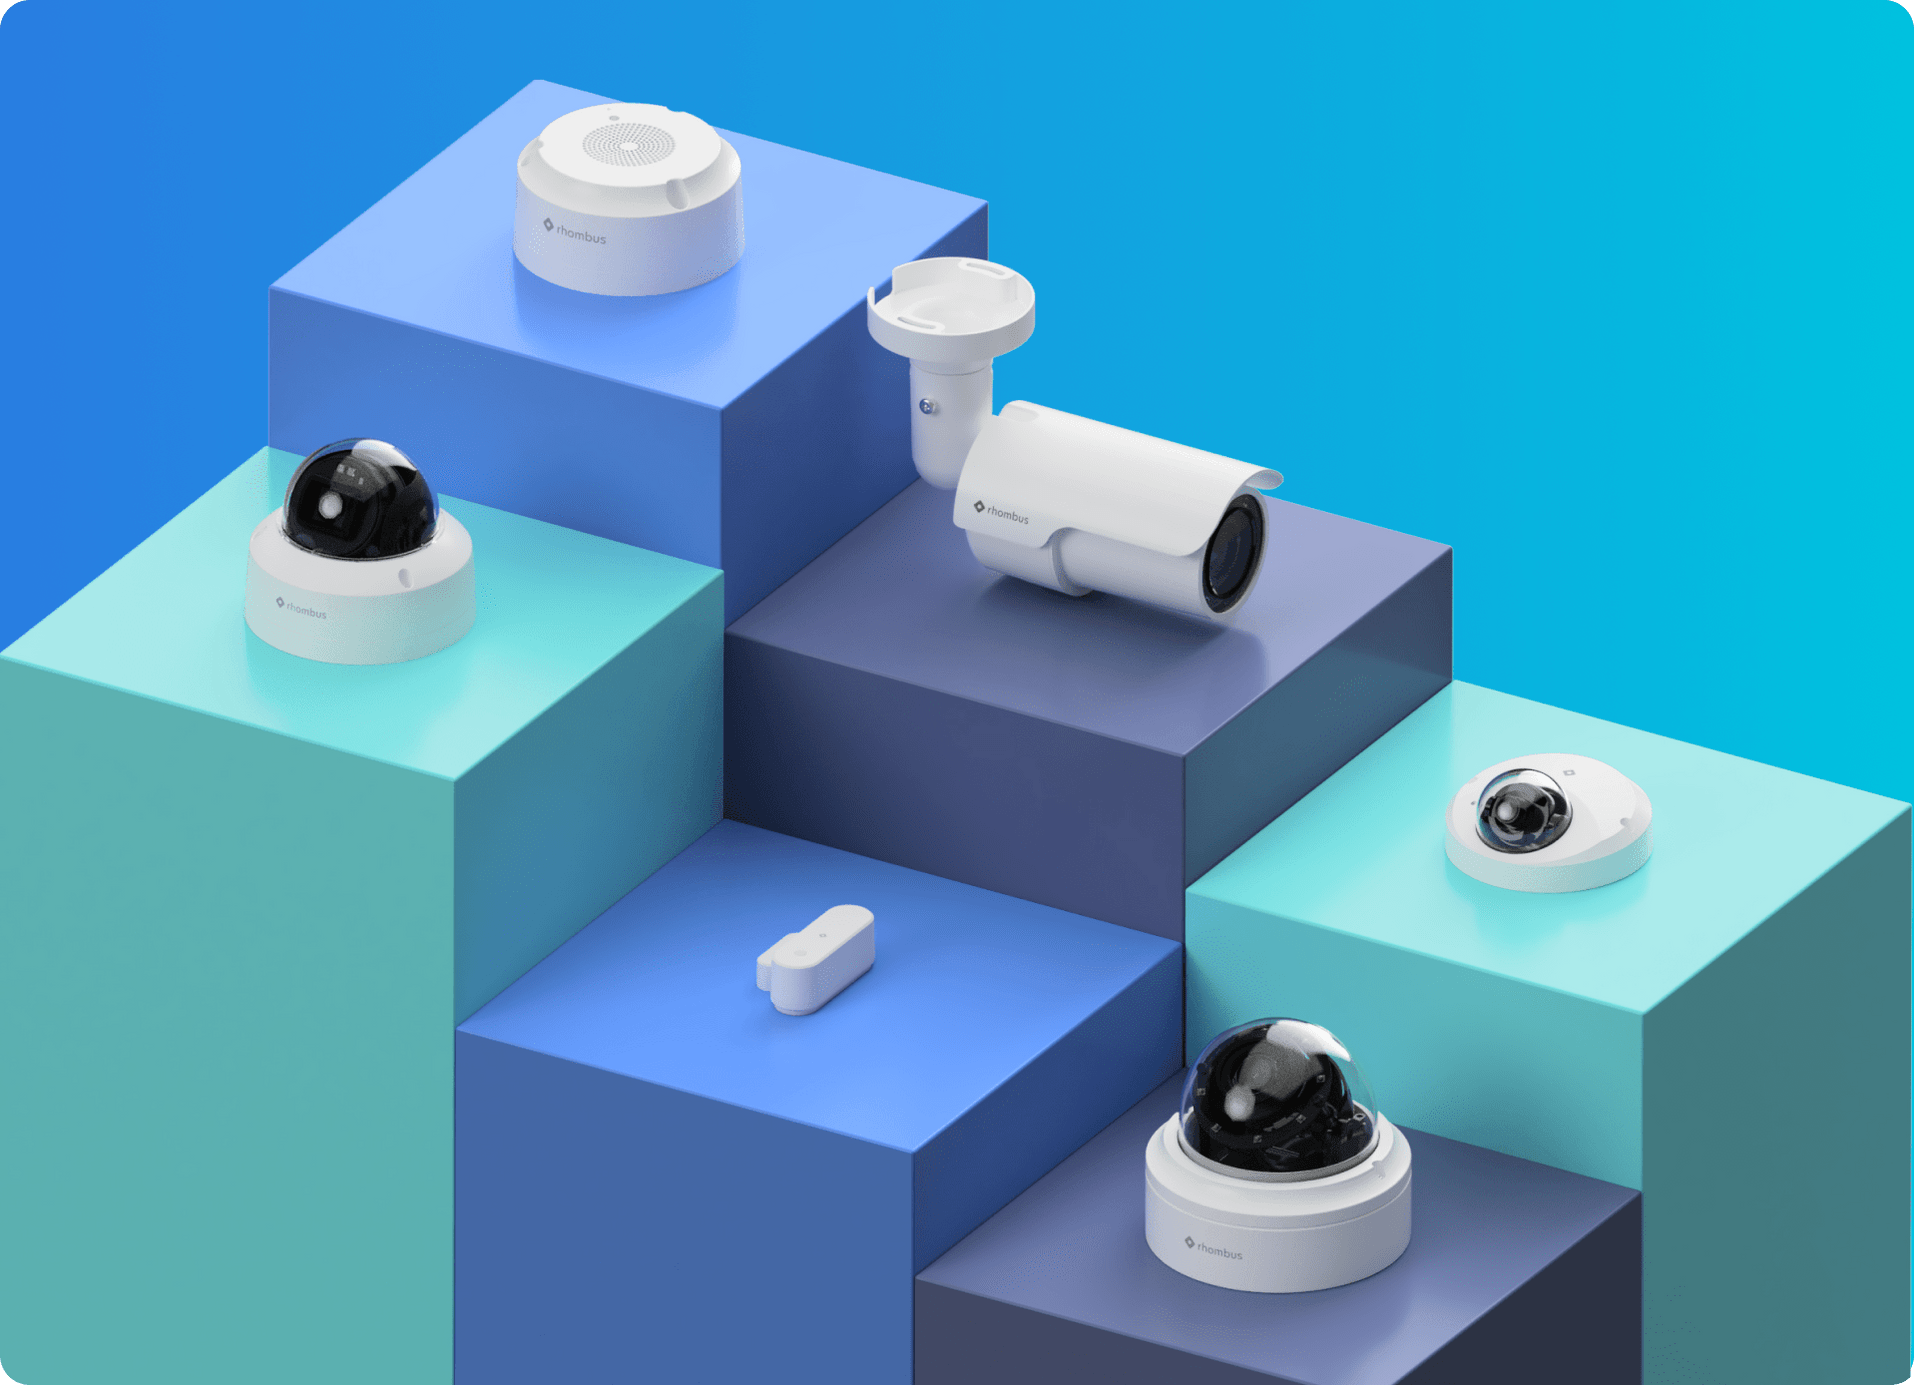 #1 Cloud-based Security Cameras for Your Business